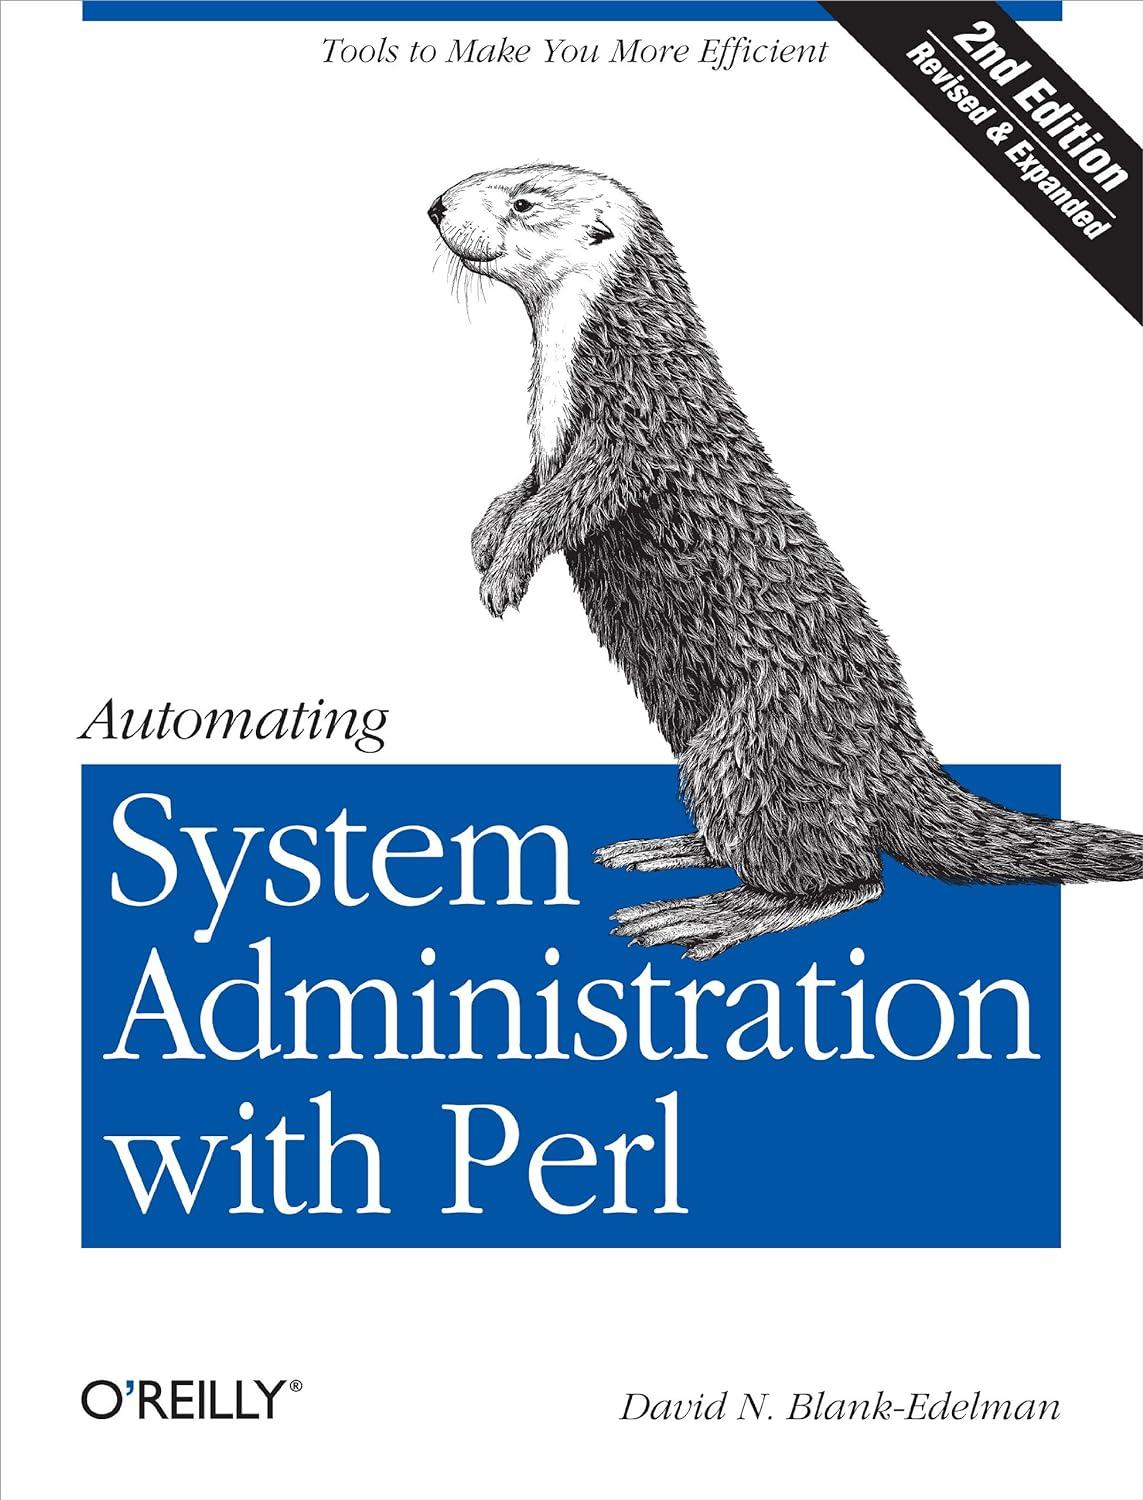 automating system administration with perl 2nd edition david blank-edelman 059600639x, 9780596006396